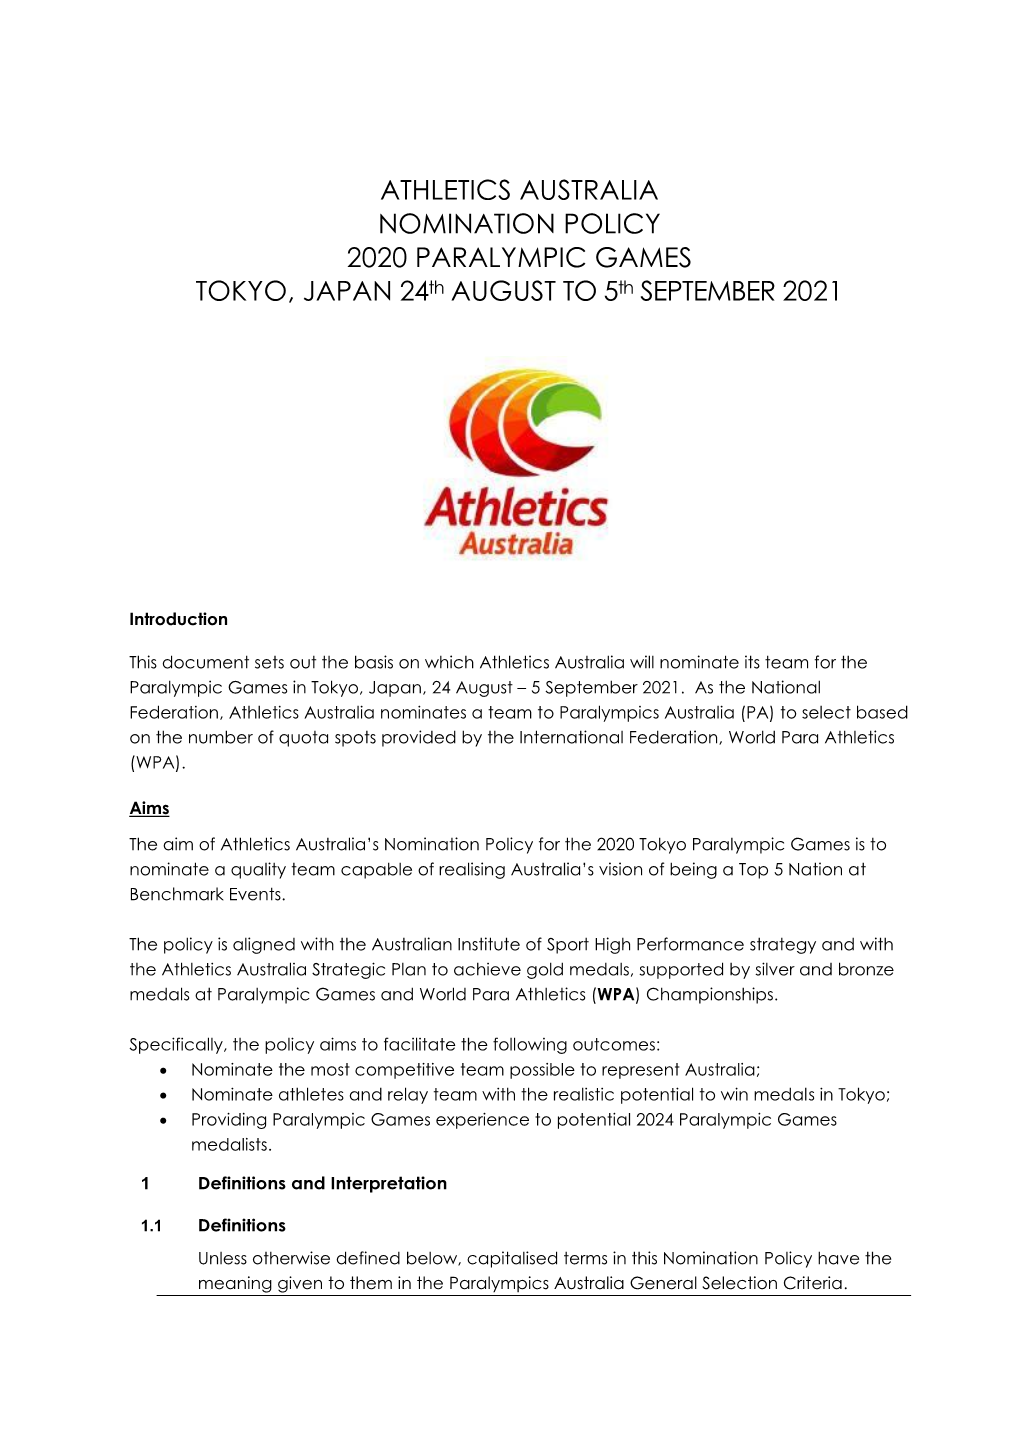 ATHLETICS AUSTRALIA NOMINATION POLICY 2020 PARALYMPIC GAMES TOKYO, JAPAN 24Th AUGUST to 5Th SEPTEMBER 2021